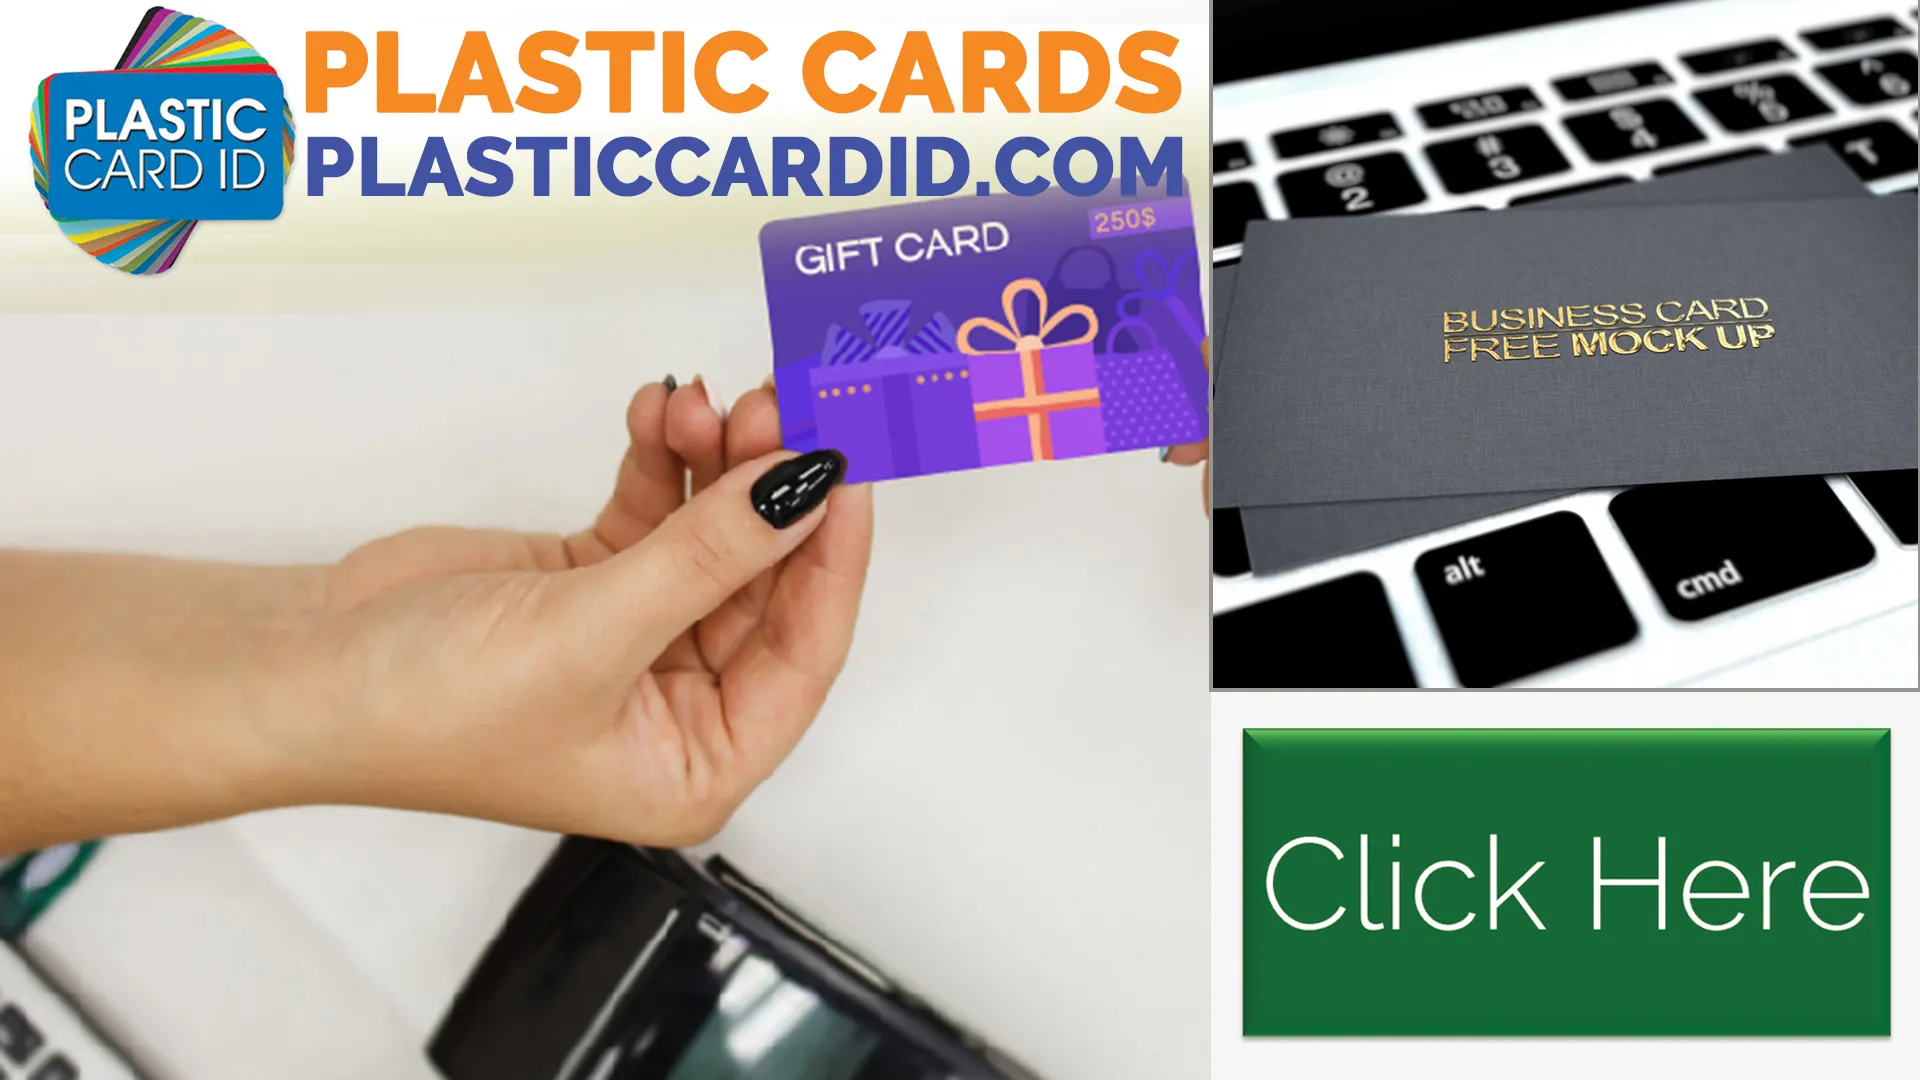 Ease of Access: Order Your Quality Cards With a Simple Call